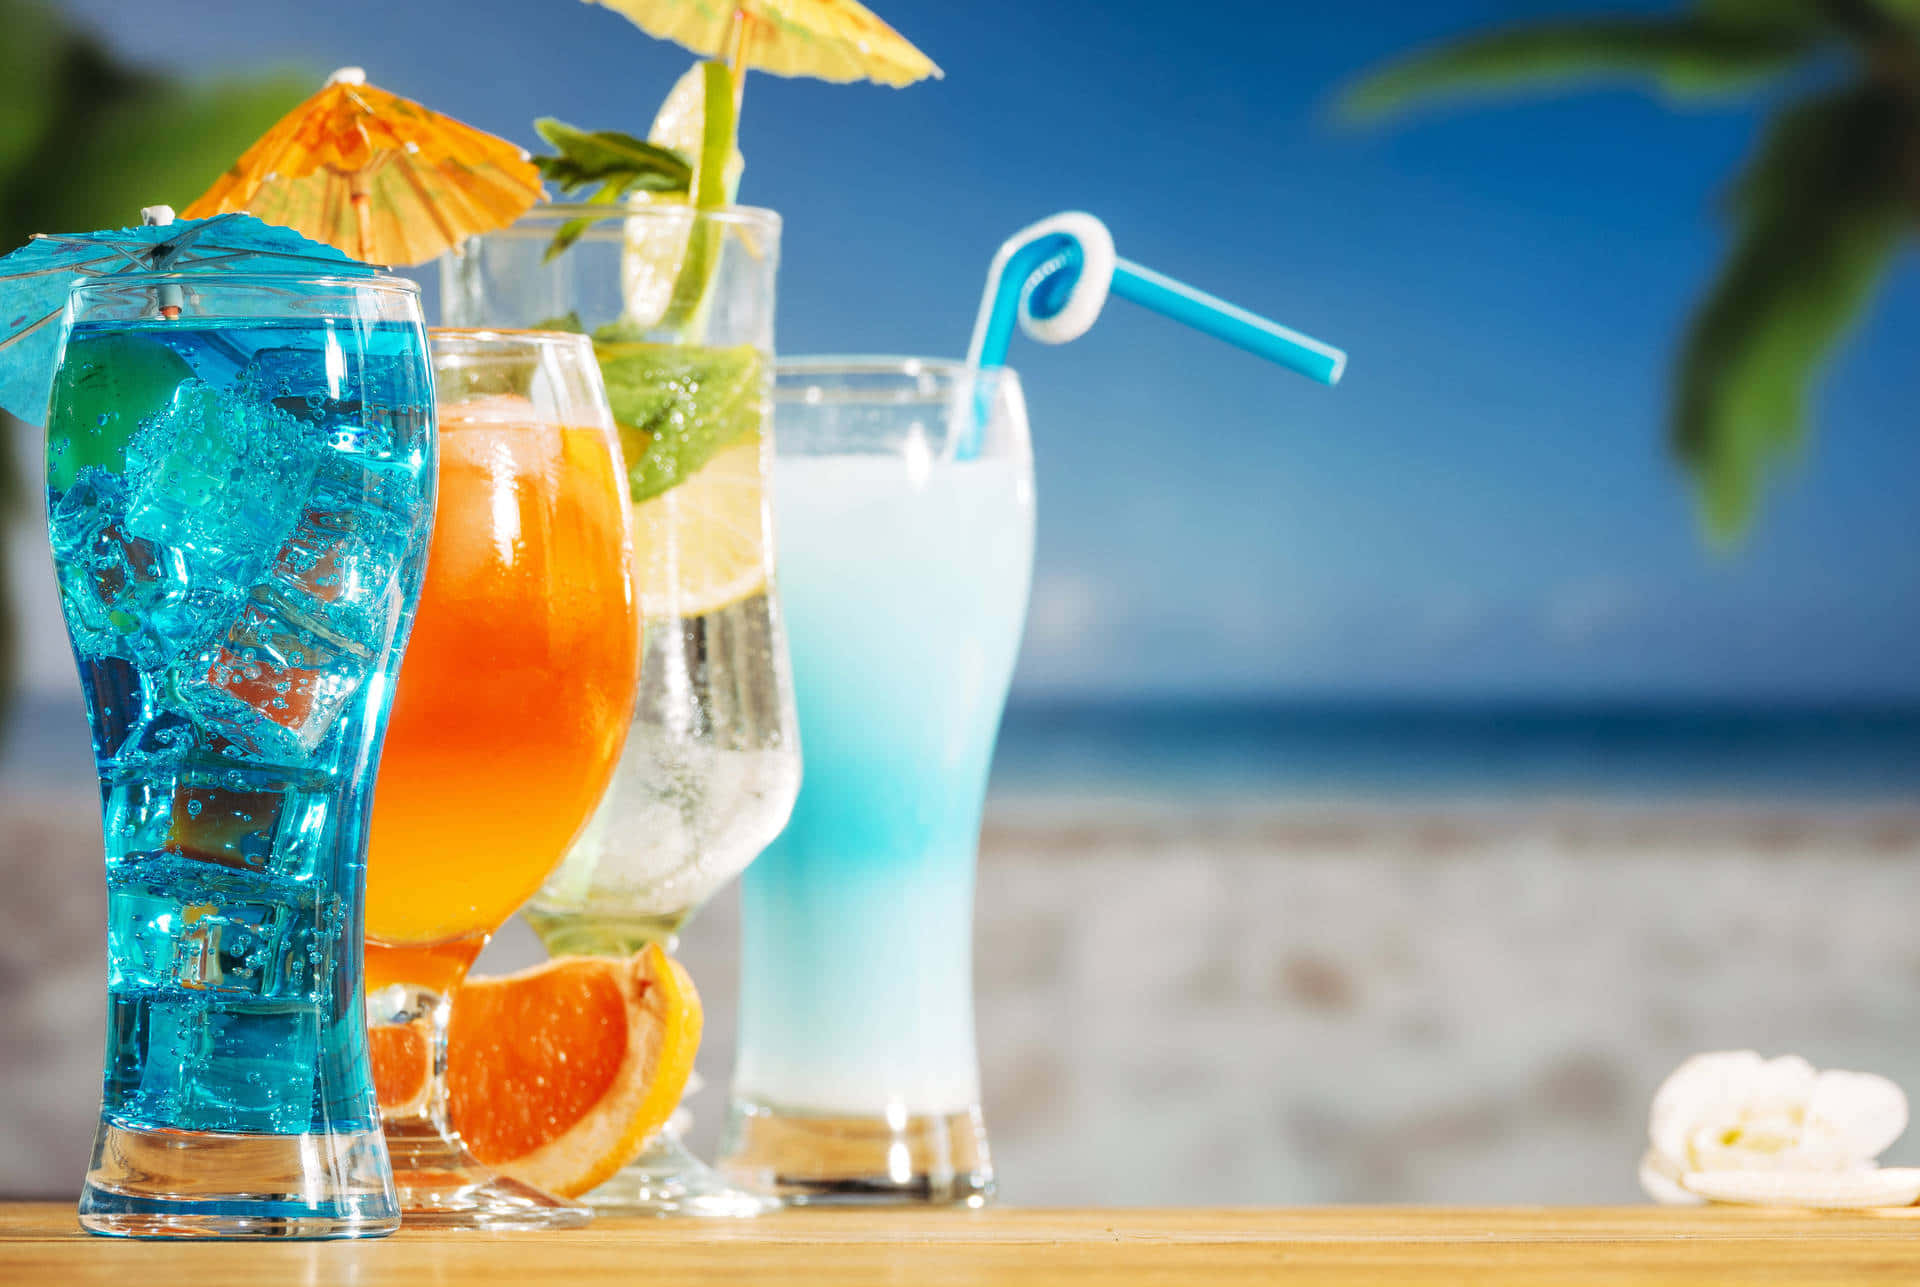 Zesty Cocktails By The Beach Wallpaper